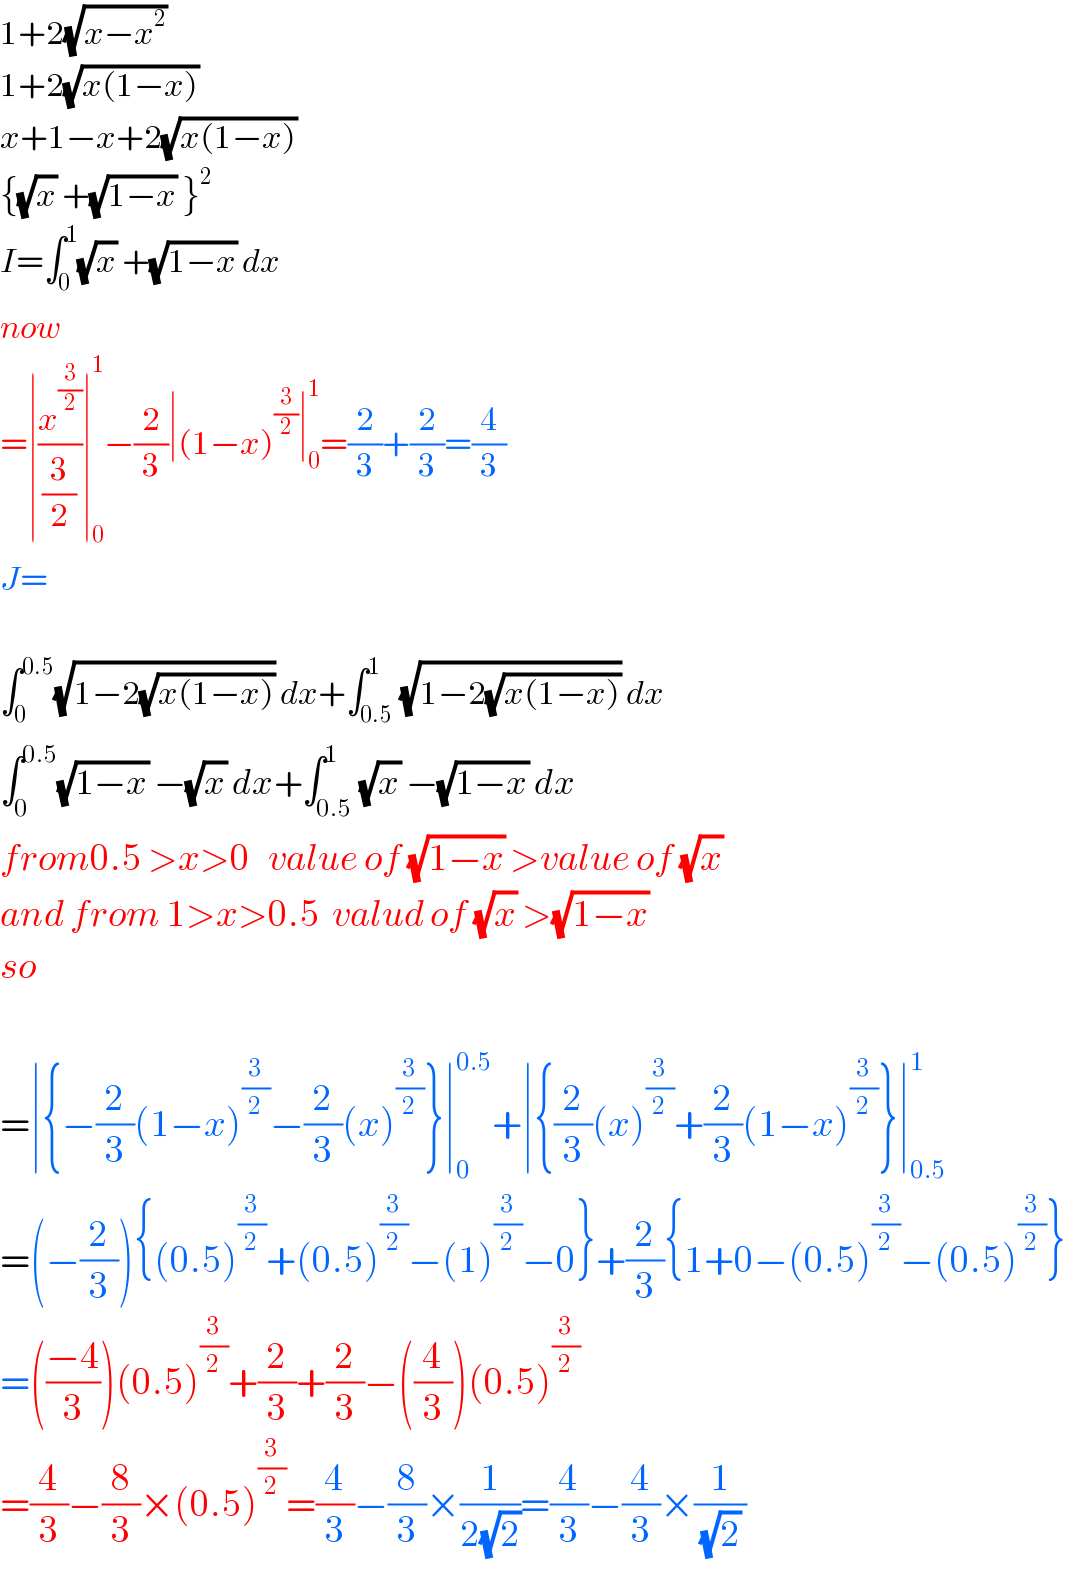 1+2(√(x−x^2 ))   1+2(√(x(1−x)))   x+1−x+2(√(x(1−x)))   {(√x) +(√(1−x)) }^2   I=∫_0 ^1 (√x) +(√(1−x)) dx  now   =∣(x^(3/2) /(3/2))∣_0 ^1 −(2/3)∣(1−x)^(3/2) ∣_0 ^1 =(2/3)+(2/3)=(4/3)  J=    ∫_0 ^(0.5) (√(1−2(√(x(1−x))))) dx+∫_(0.5) ^1 (√(1−2(√(x(1−x))))) dx  ∫_0 ^(0.5) (√(1−x)) −(√x) dx+∫_(0.5) ^1 (√x) −(√(1−x)) dx  from0.5 >x>0   value of (√(1−x)) >value of (√x)   and from 1>x>0.5  valud of (√x) >(√(1−x))   so    =∣{−(2/3)(1−x)^(3/2) −(2/3)(x)^(3/2) }∣_0 ^(0.5) +∣{(2/3)(x)^(3/2) +(2/3)(1−x)^(3/2) }∣_(0.5) ^1   =(−(2/3)){(0.5)^(3/2) +(0.5)^(3/2) −(1)^(3/2) −0}+(2/3){1+0−(0.5)^(3/2) −(0.5)^(3/2) }  =(((−4)/3))(0.5)^(3/2) +(2/3)+(2/3)−((4/3))(0.5)^(3/2)   =(4/3)−(8/3)×(0.5)^(3/2) =(4/3)−(8/3)×(1/(2(√2)))=(4/3)−(4/3)×(1/((√2) ))  